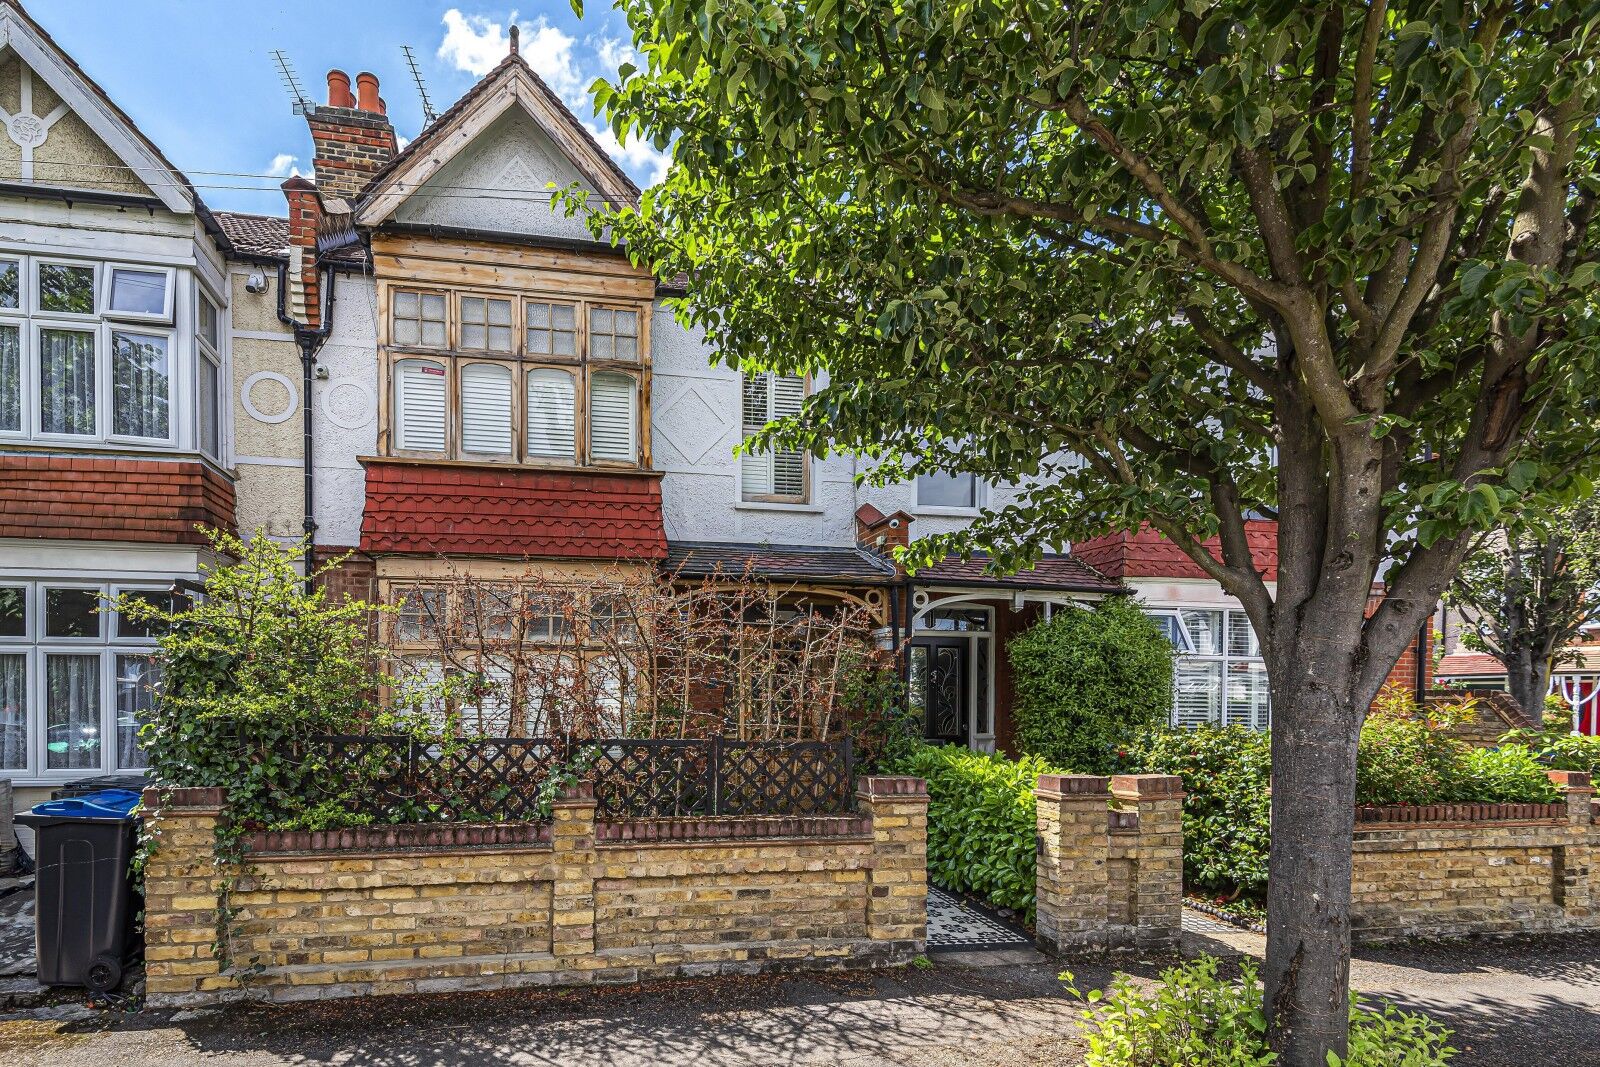 4 bedroom mid terraced house for sale Winifred Road, London, SW19, main image